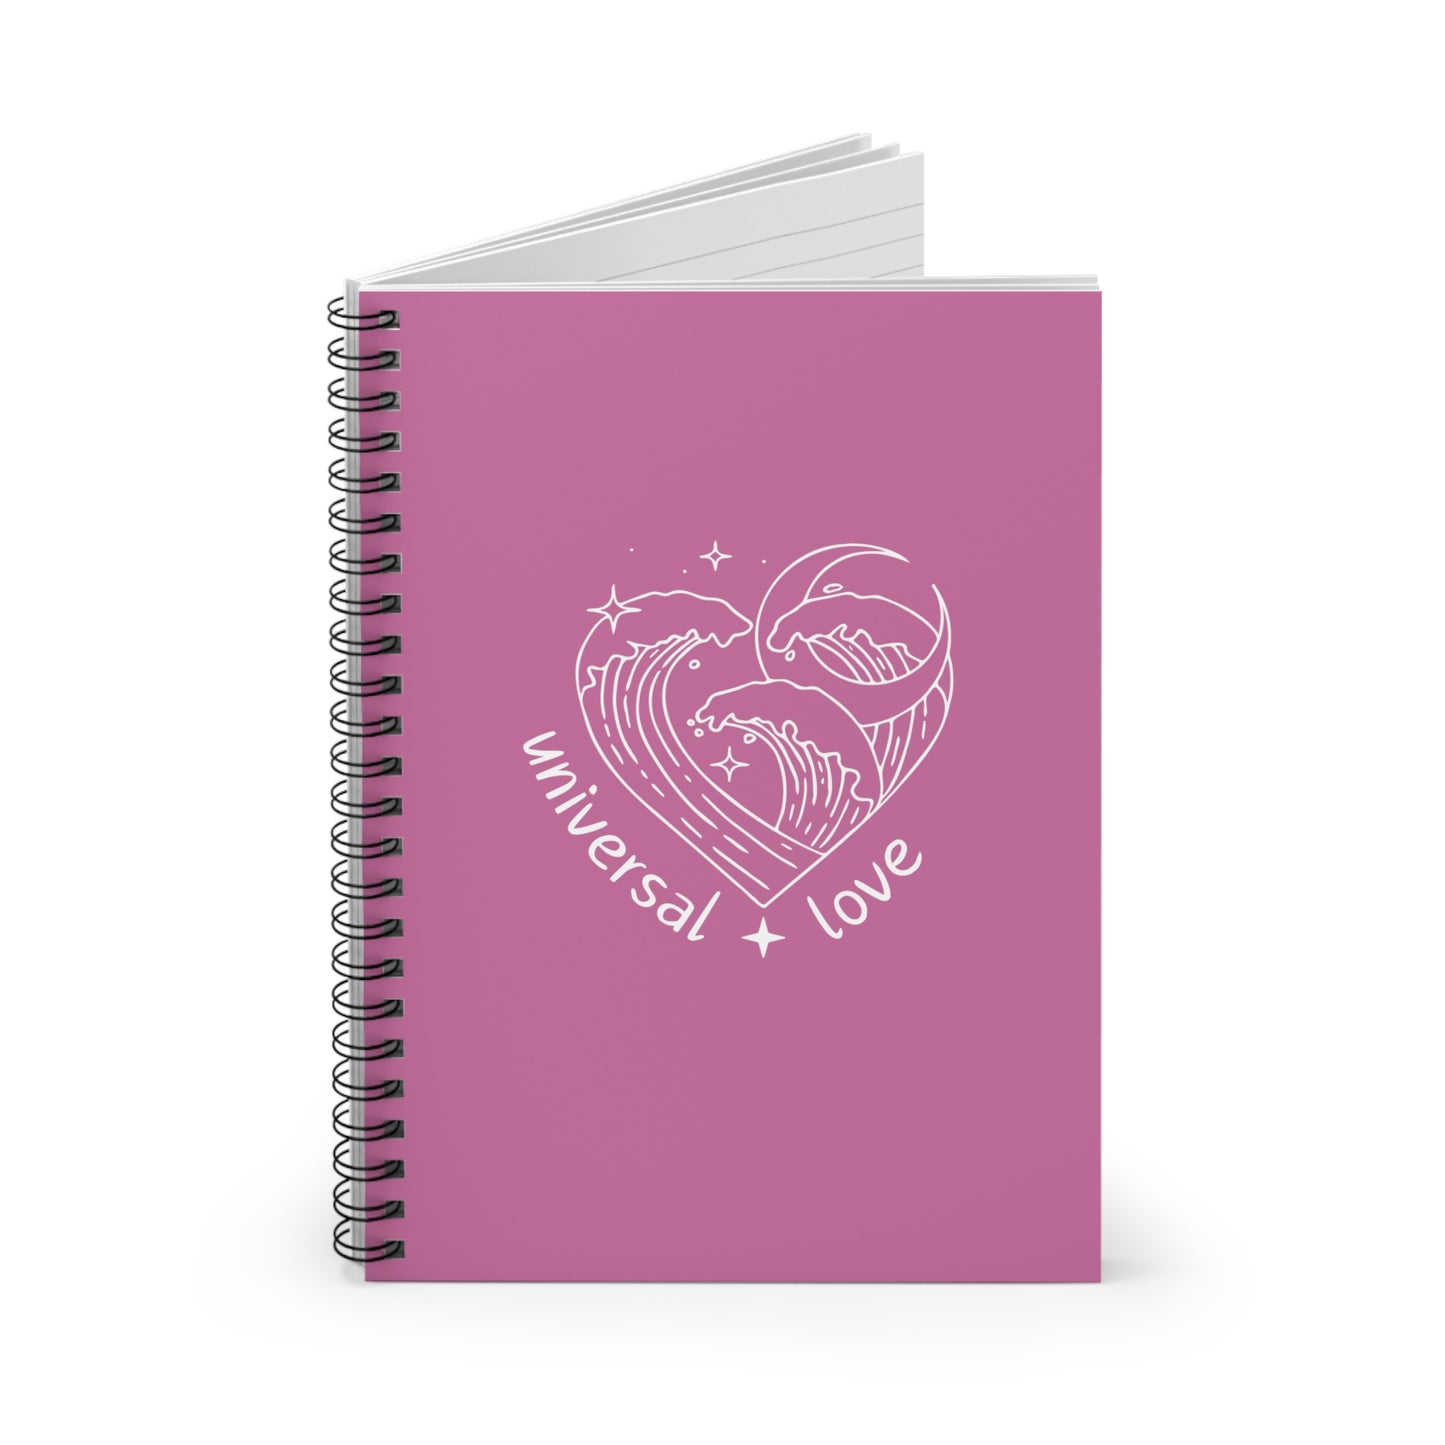 Universal Love Pink Spiral Notebook - Ruled Line